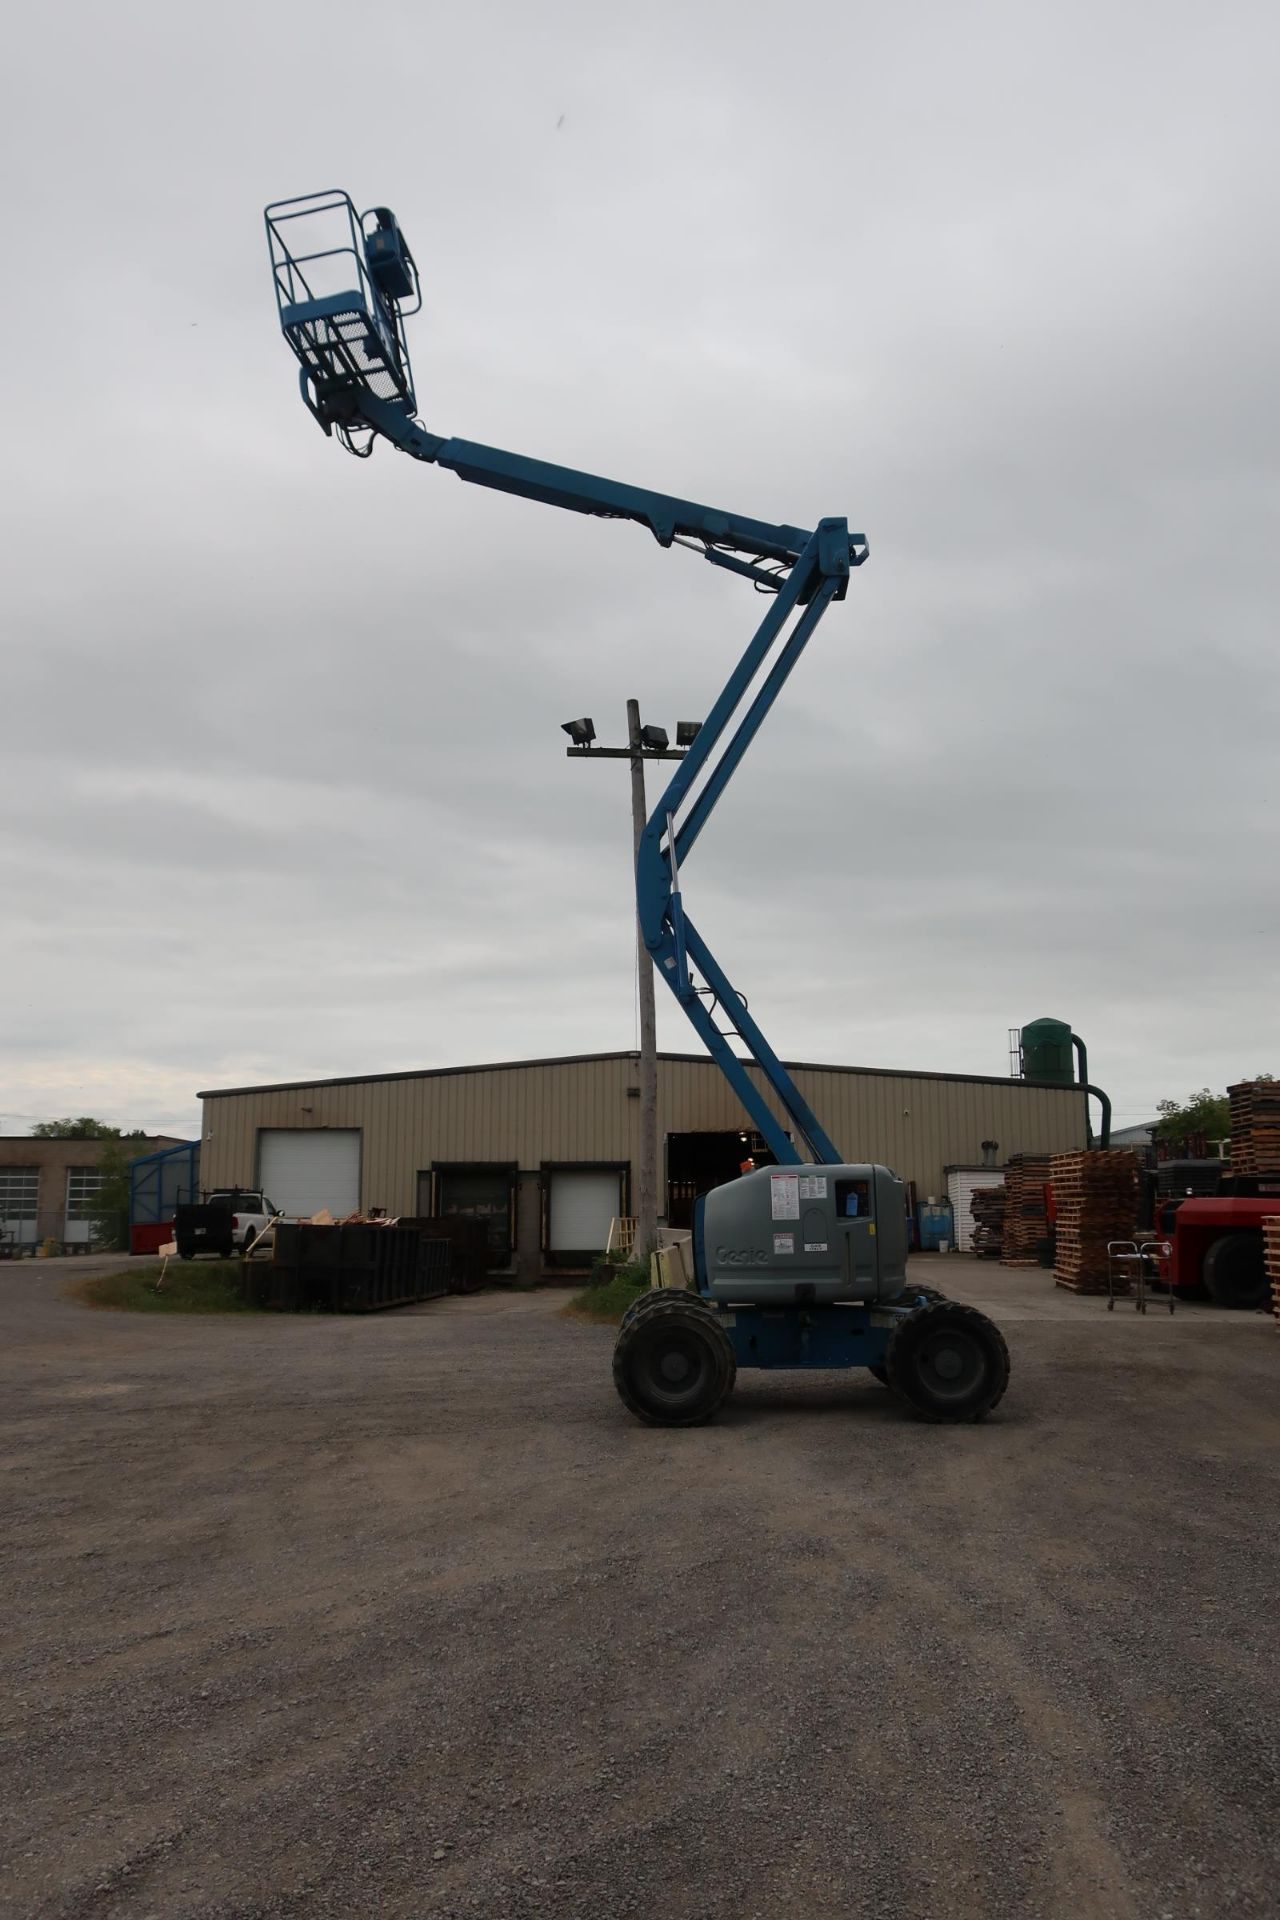 FREE CUSTOMS DOCS & 0 DUTY FEES - MINT Genie Zoom Boom 4x4 Articulating Lift model Z-45/25 45' heigh - Image 3 of 6